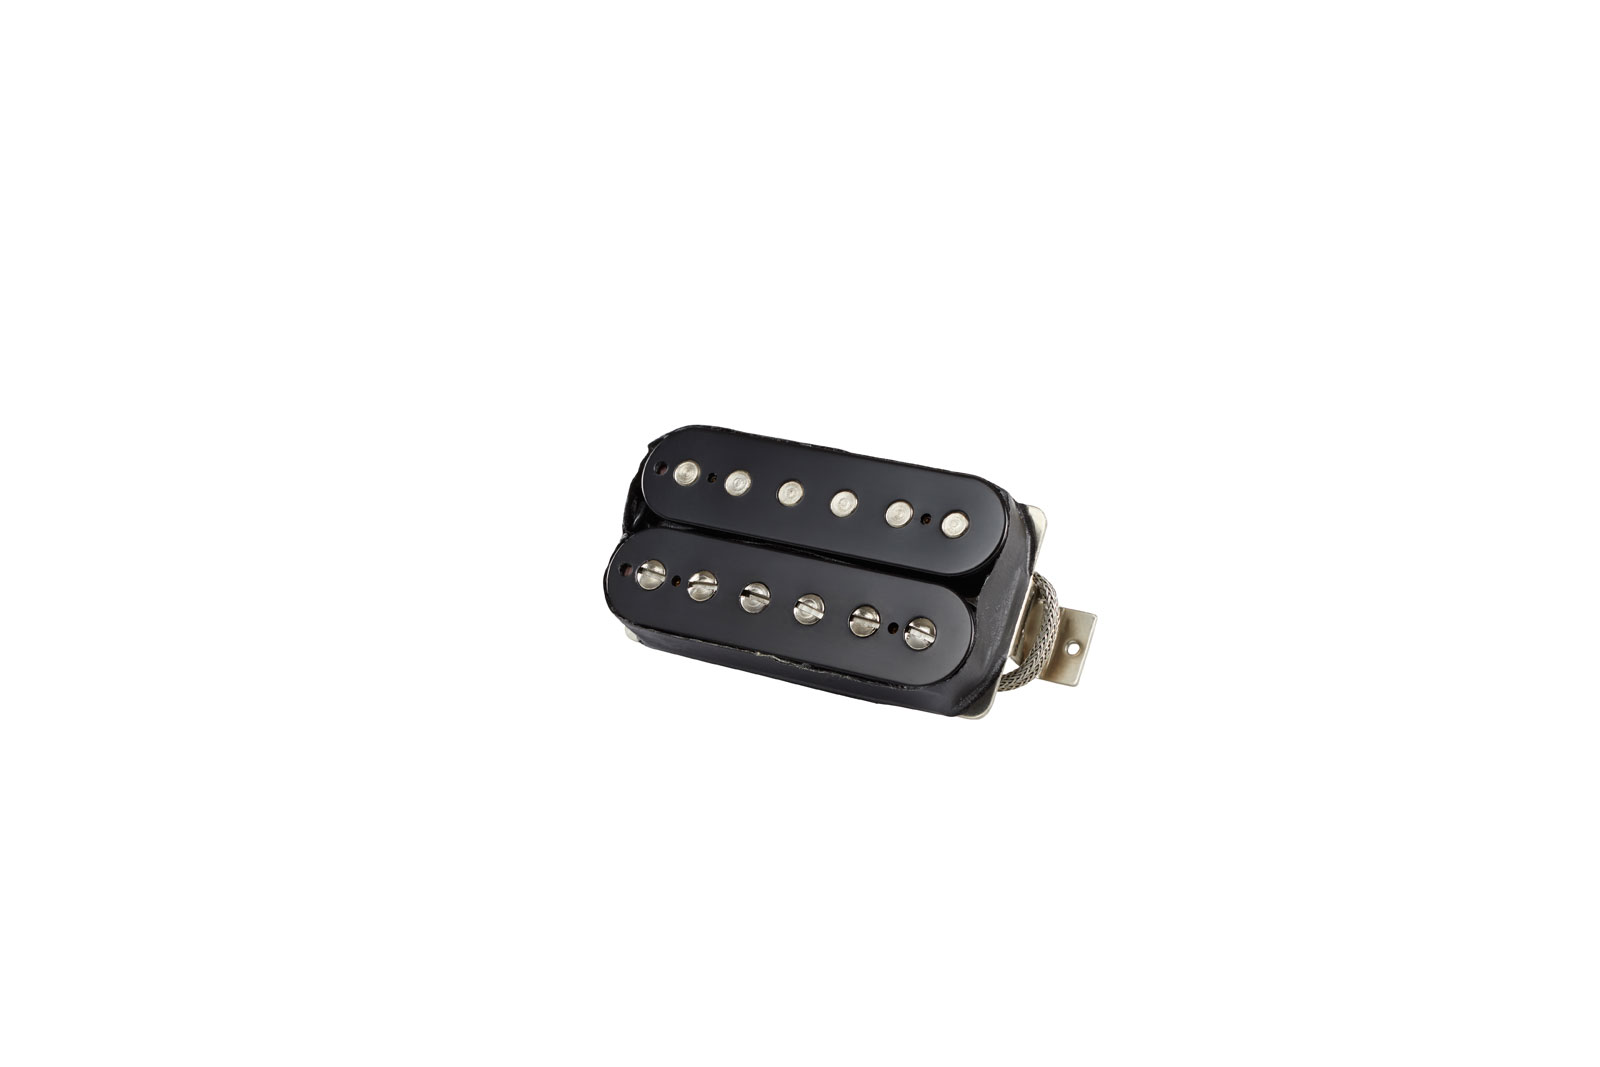 GIBSON ACCESSORIES 57 CLASSIC DOUBLE BLACK 2-CONDUCTOR 7.9K OHMS